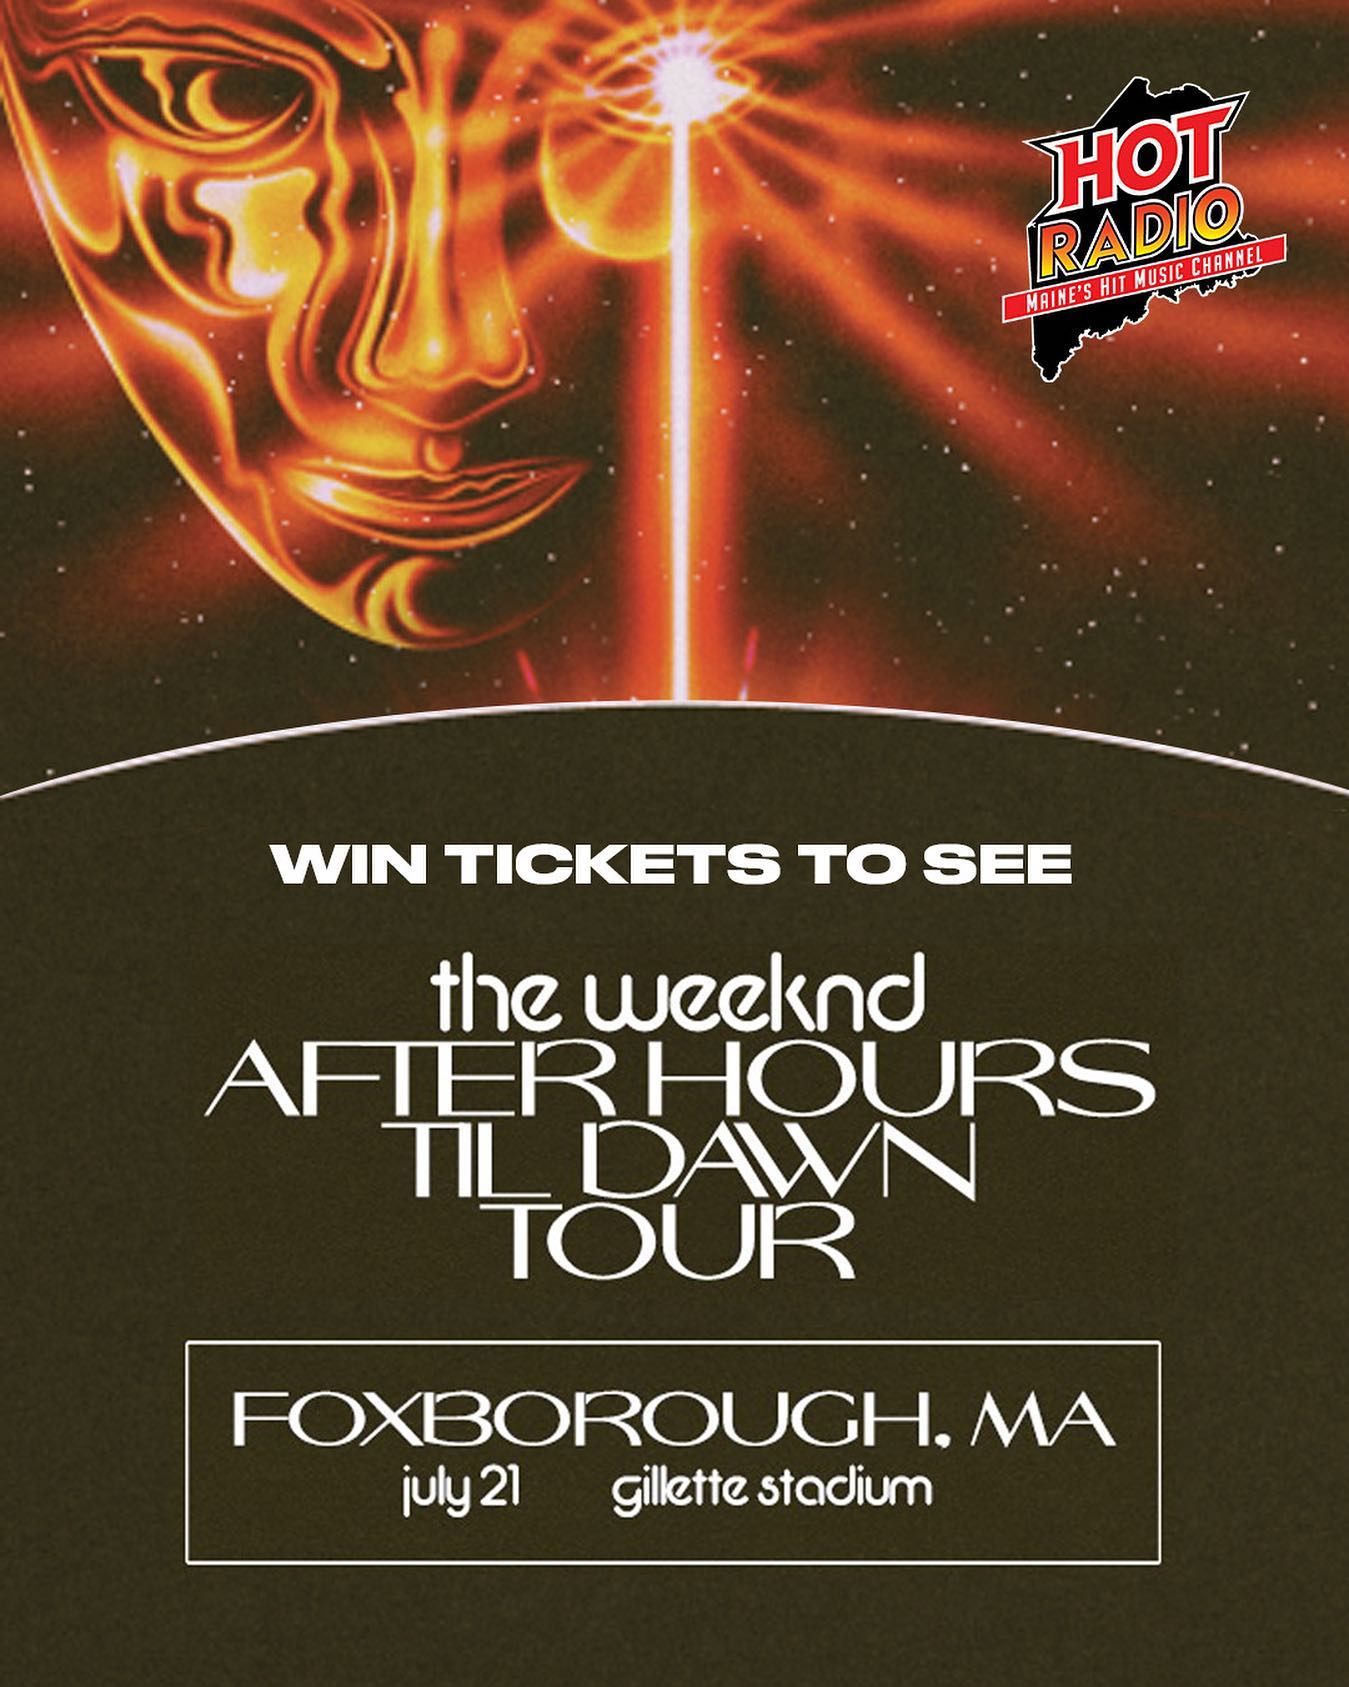 It’s THE WEEKND all week long 🚨 Listen to Hot Radio Maine at 7am, 8am, and 5pm this week for your chance to win tickets to the After Hours Til Dawn Tour 🔥